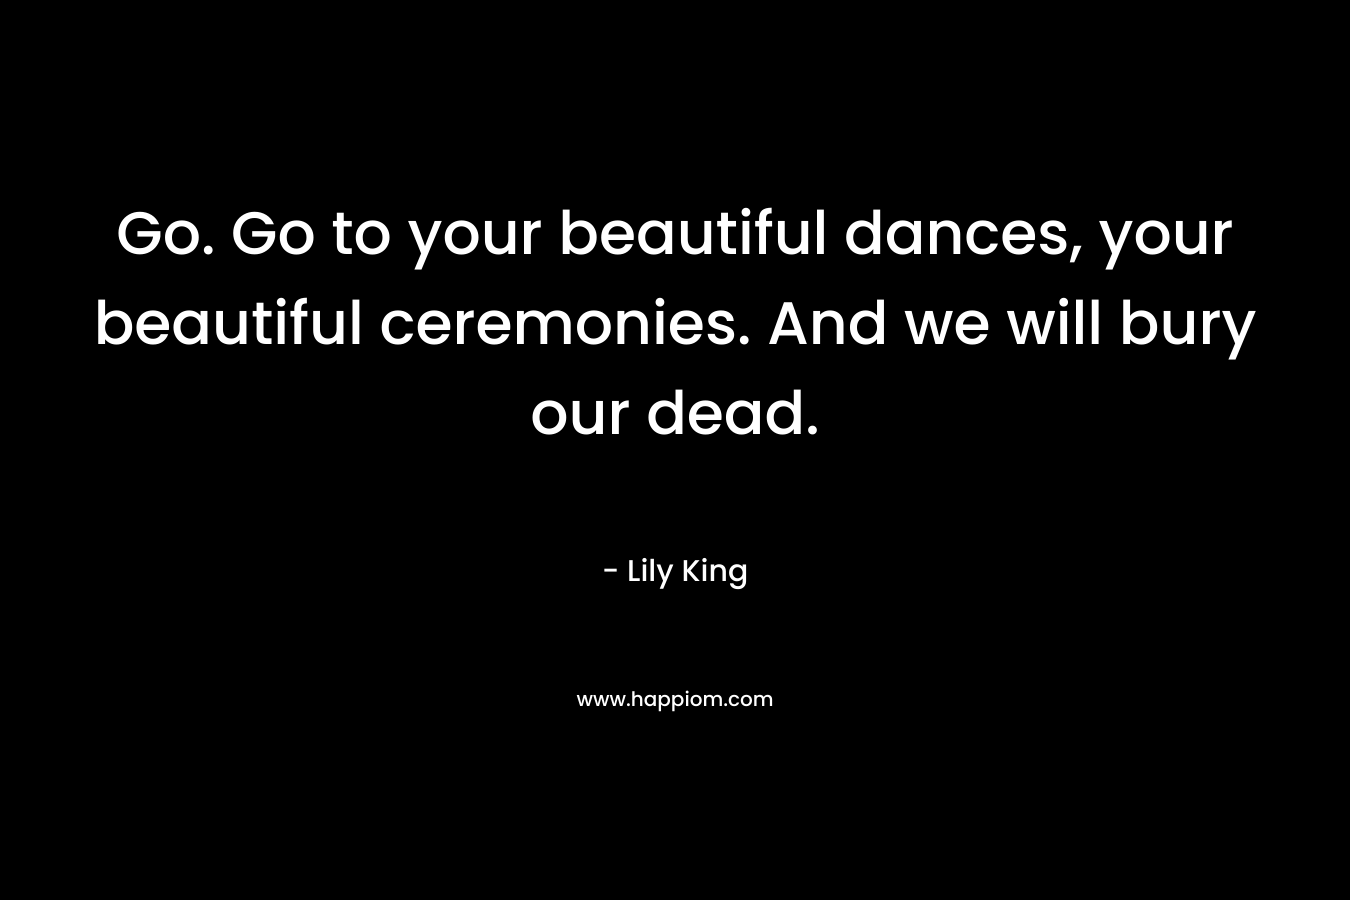 Go. Go to your beautiful dances, your beautiful ceremonies. And we will bury our dead. – Lily King